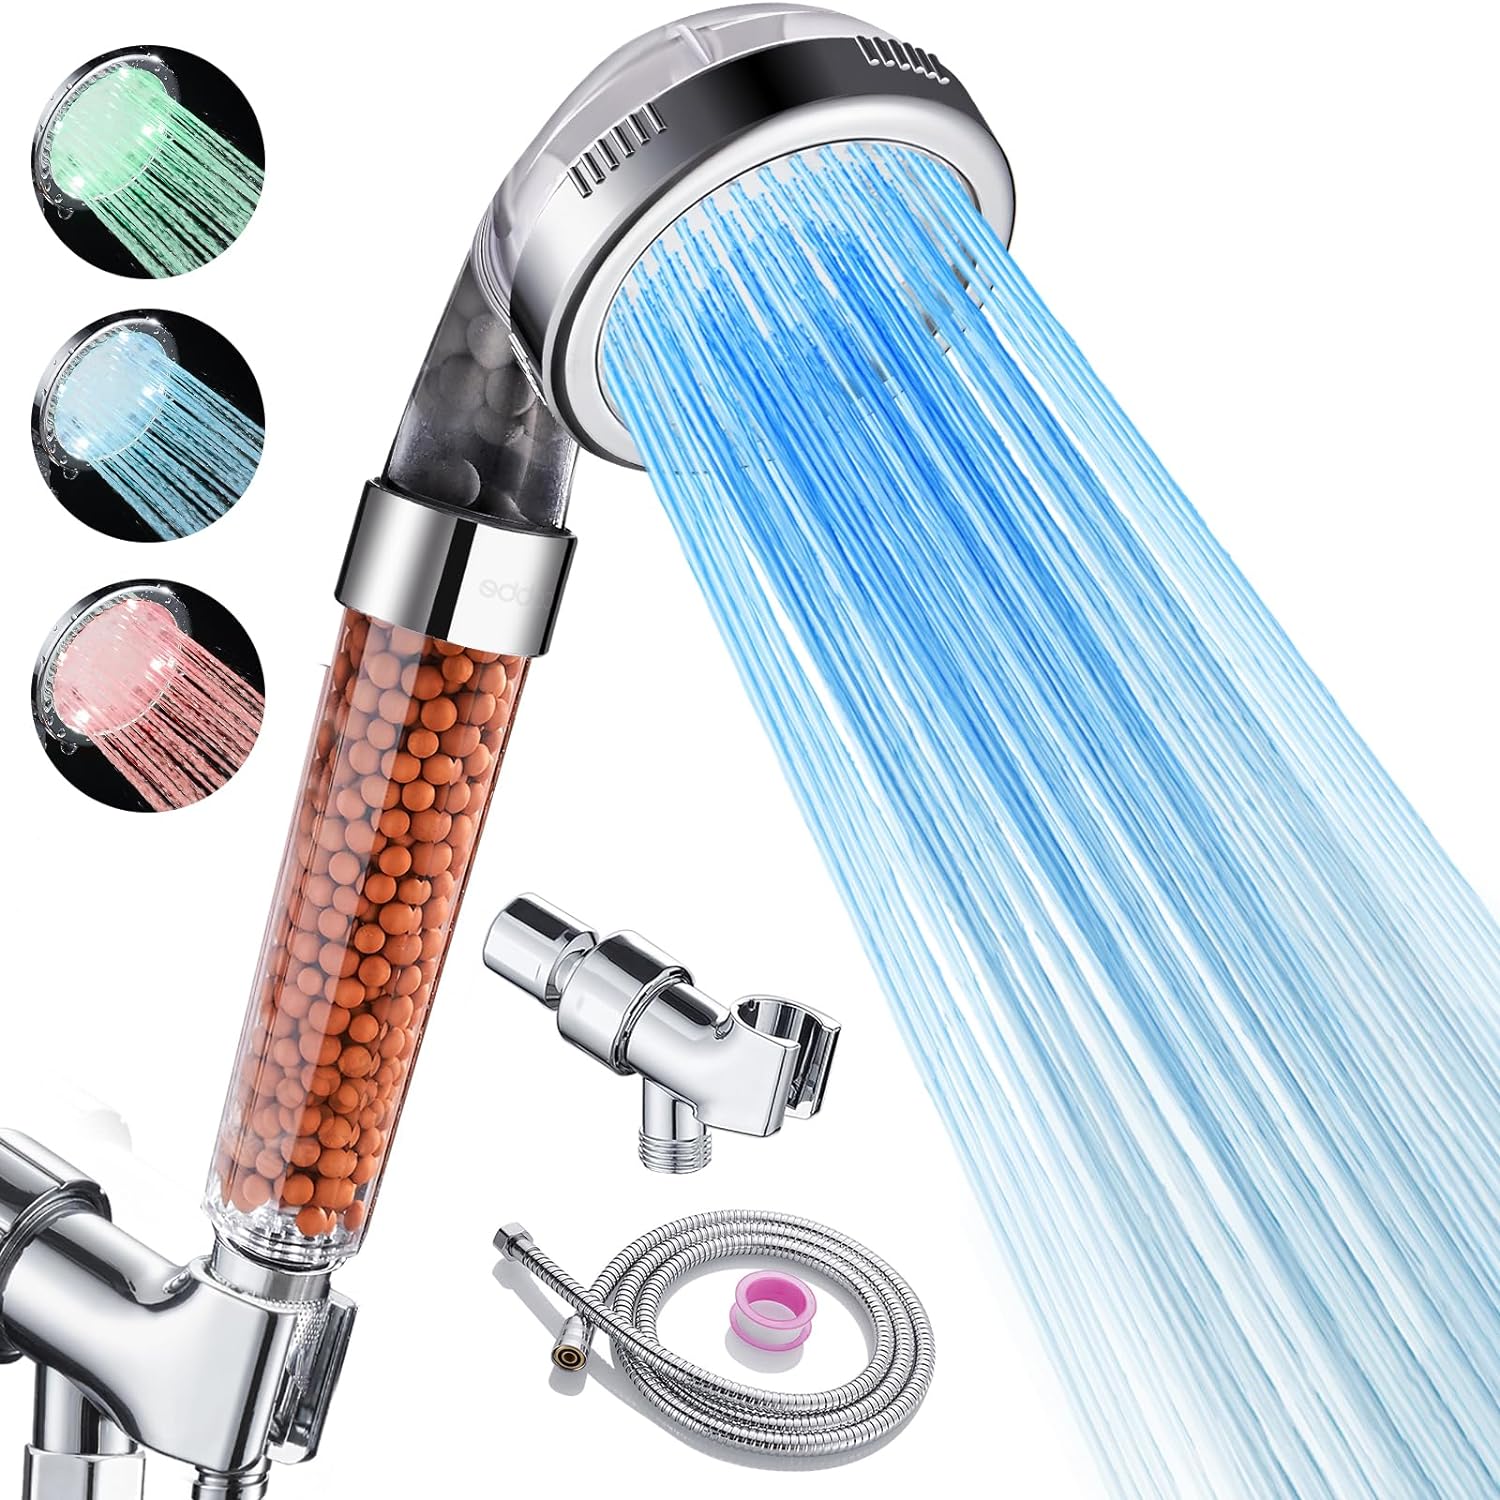 I recently purchased the LED shower head, and I'm thrilled with the results! The vibrant LED lights create a mesmerizing water display, turning my shower into a relaxing oasis. The installation was a breeze, and the water pressure is fantastic. The color changes with temperature add a cool touch, making it both functional and visually appealing. Overall, a great addition to my bathroom C highly recommend!